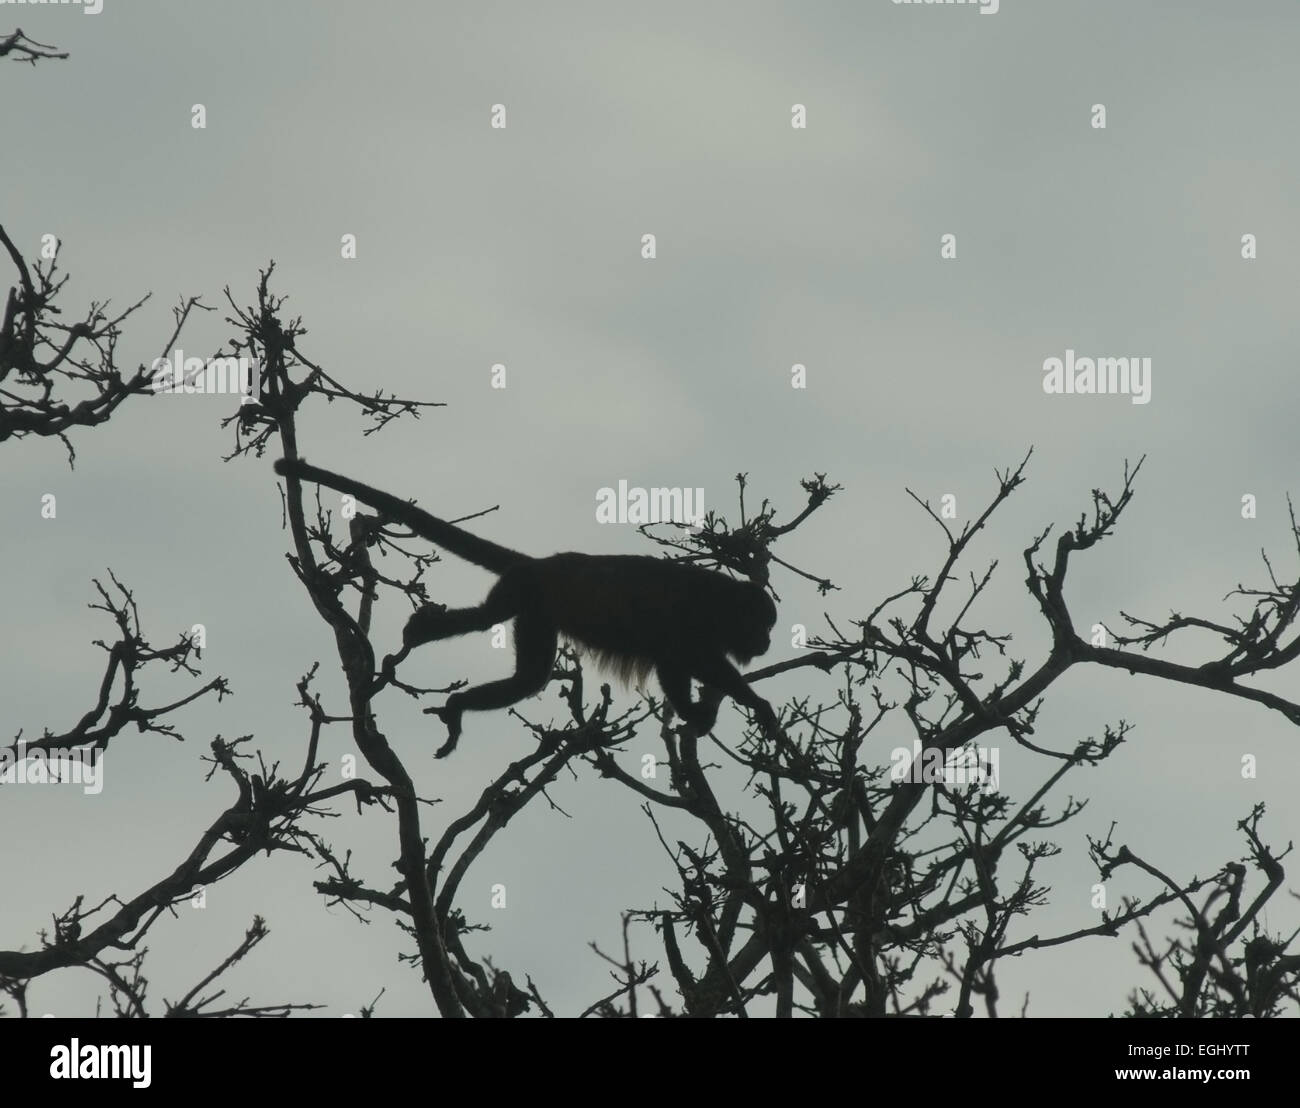 A Mantled howler monkey silhouetted against the sky, grasping with its prehensile tail as it leaps from branch to branch. Stock Photo